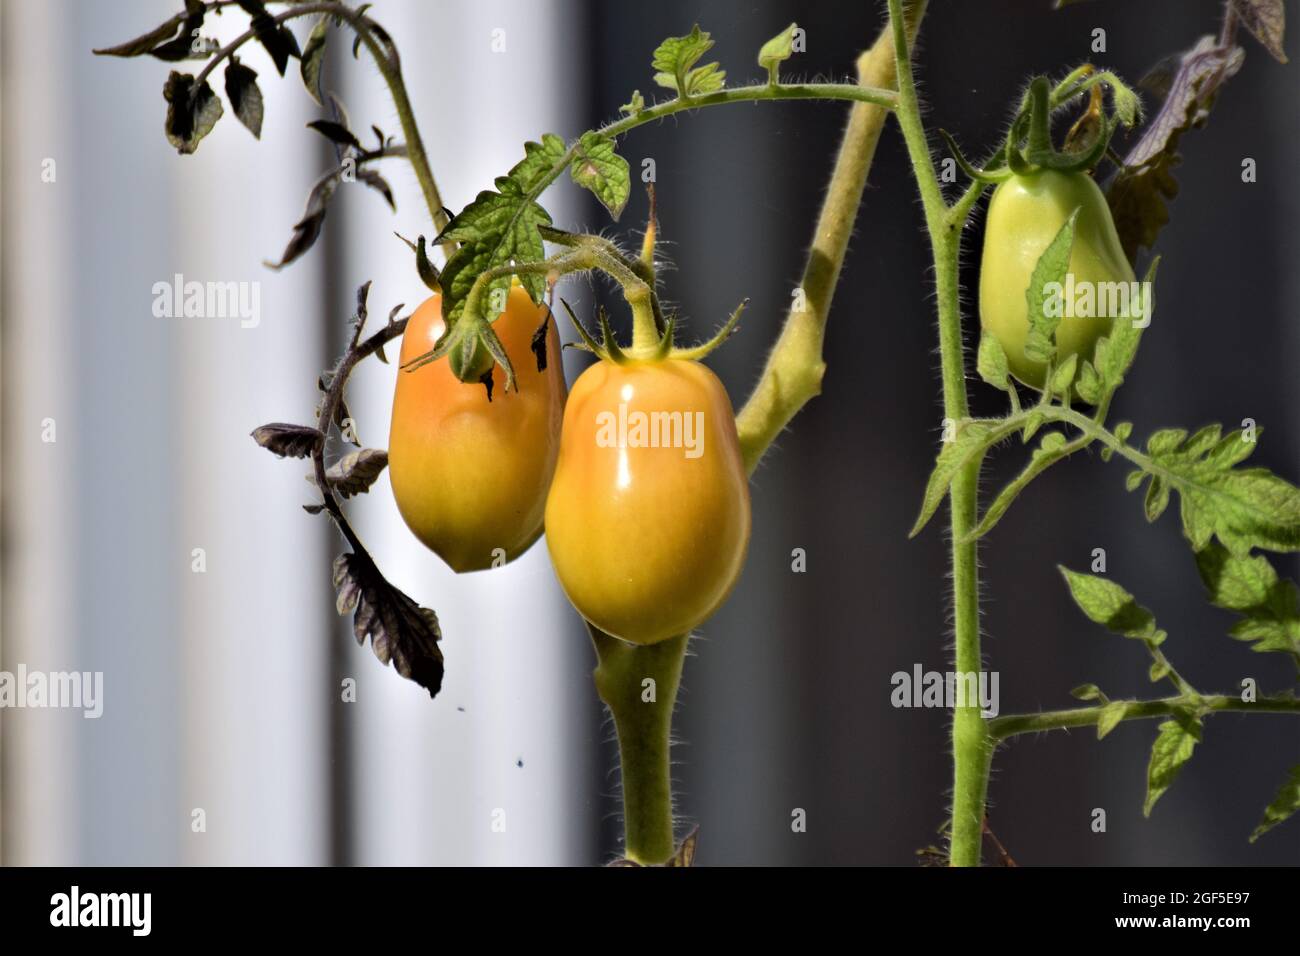 Unripe yellow tomatoes on the stem as a close up Stock Photo